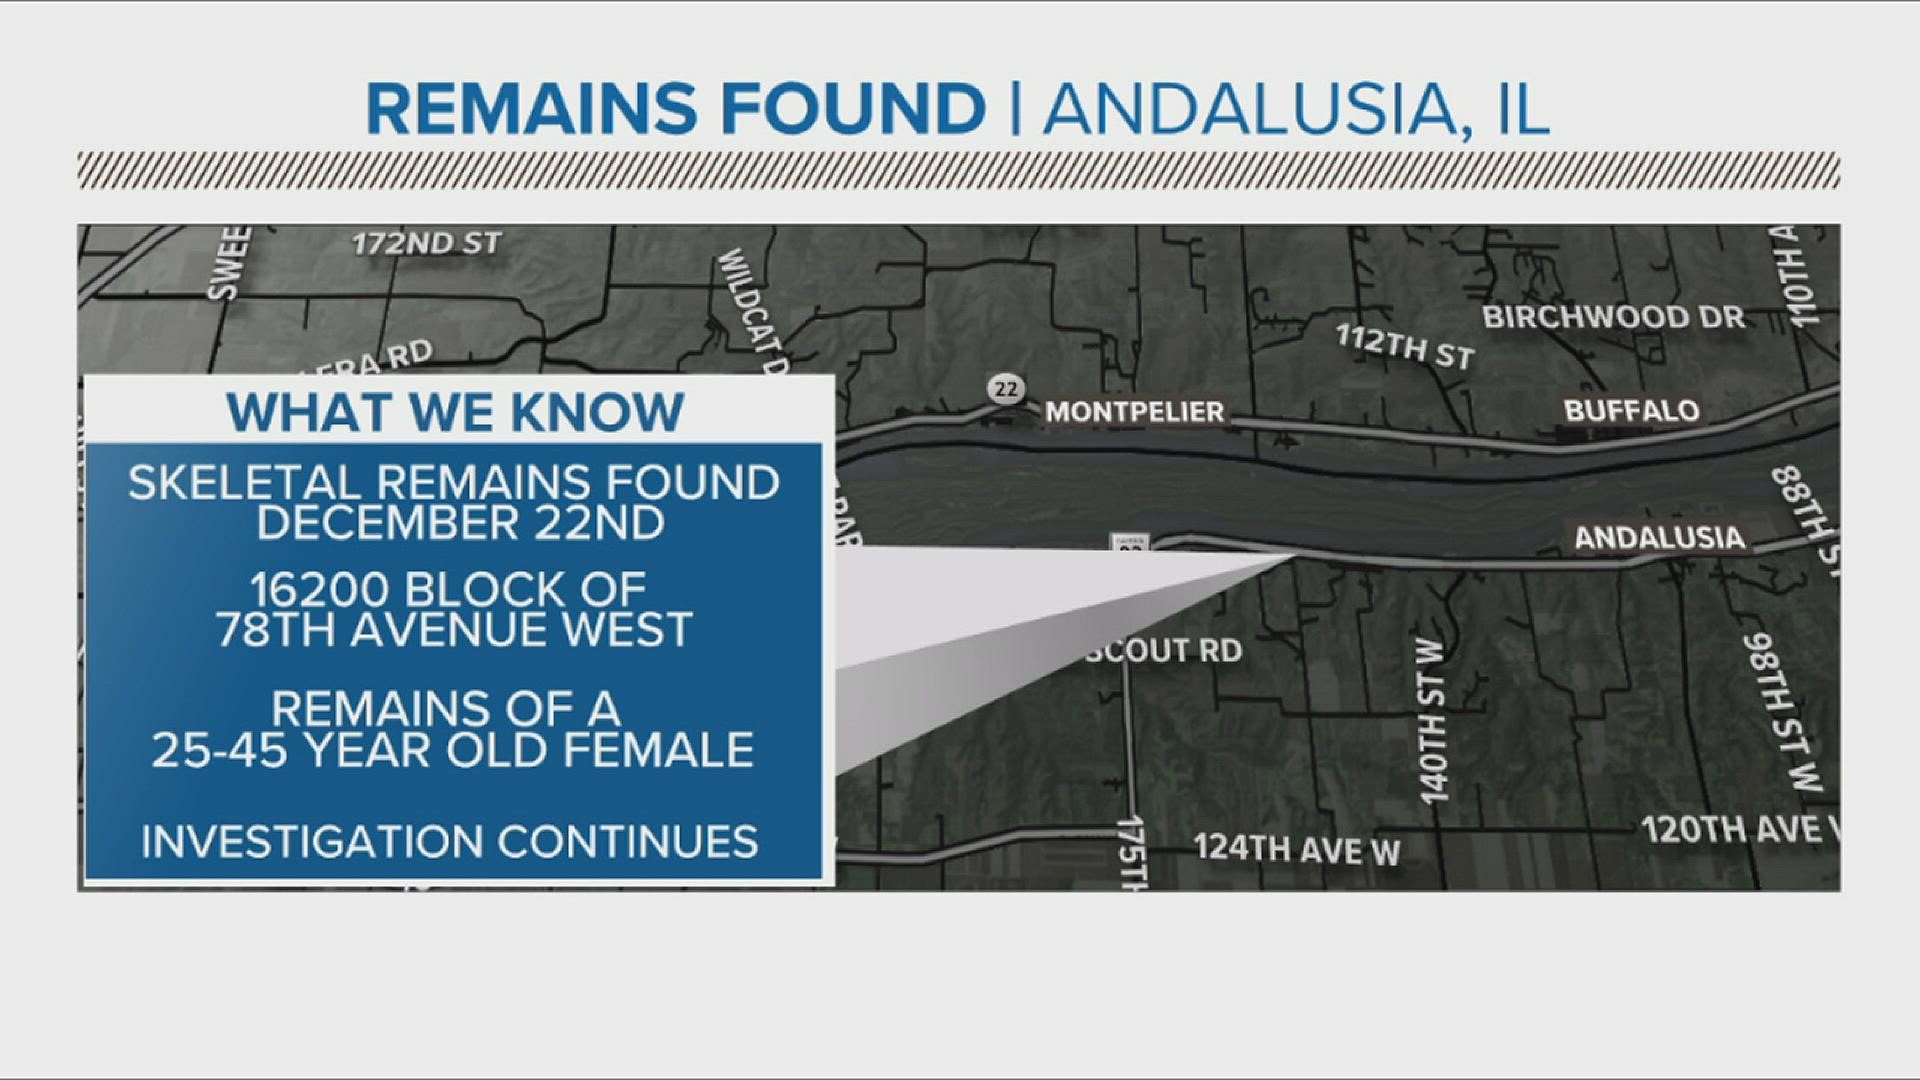 The human remains were located along the shore of the Mississippi River, west of Andalusia in the 16200 block of 78th Ave. West in December 2021.